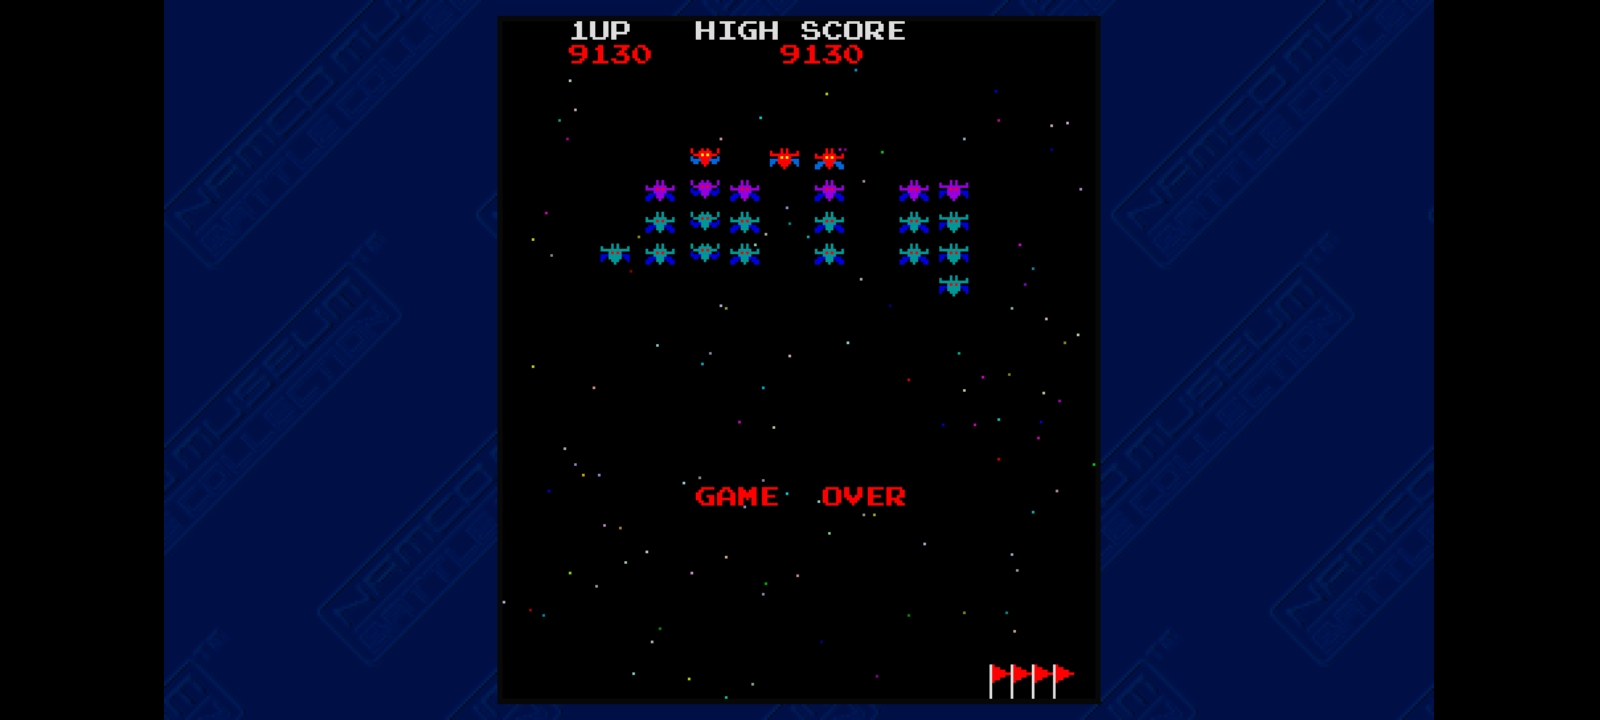 Hauntedprogram: Namco Museum: Battle Collection: Galaxian (PSP Emulated) 9,130 points on 2022-08-14 03:10:27